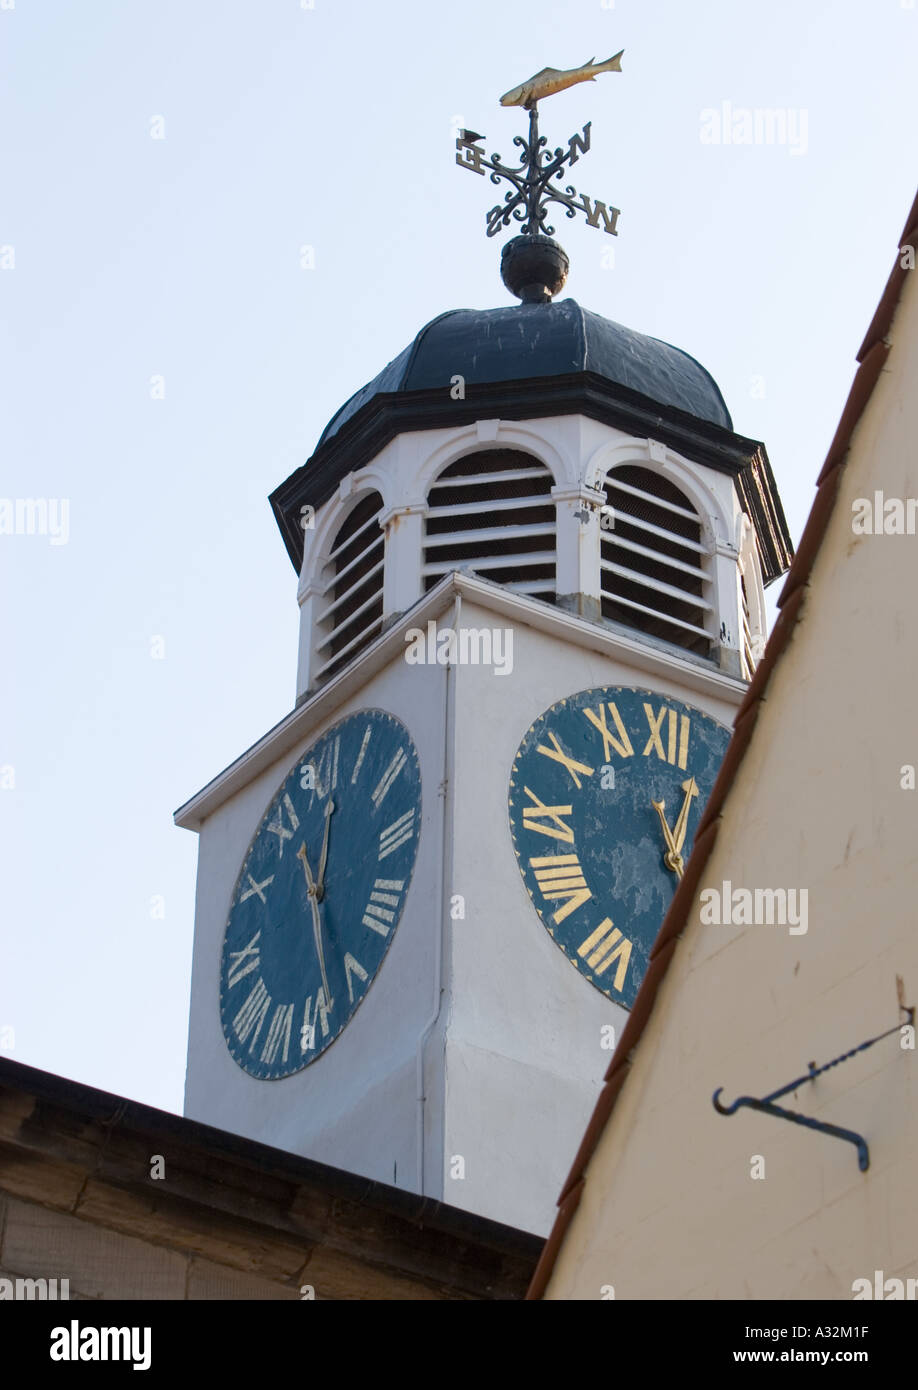 Clock tower with blue clock face and weathervane in Whitby Scarborough north yorkshire england uk Stock Photo